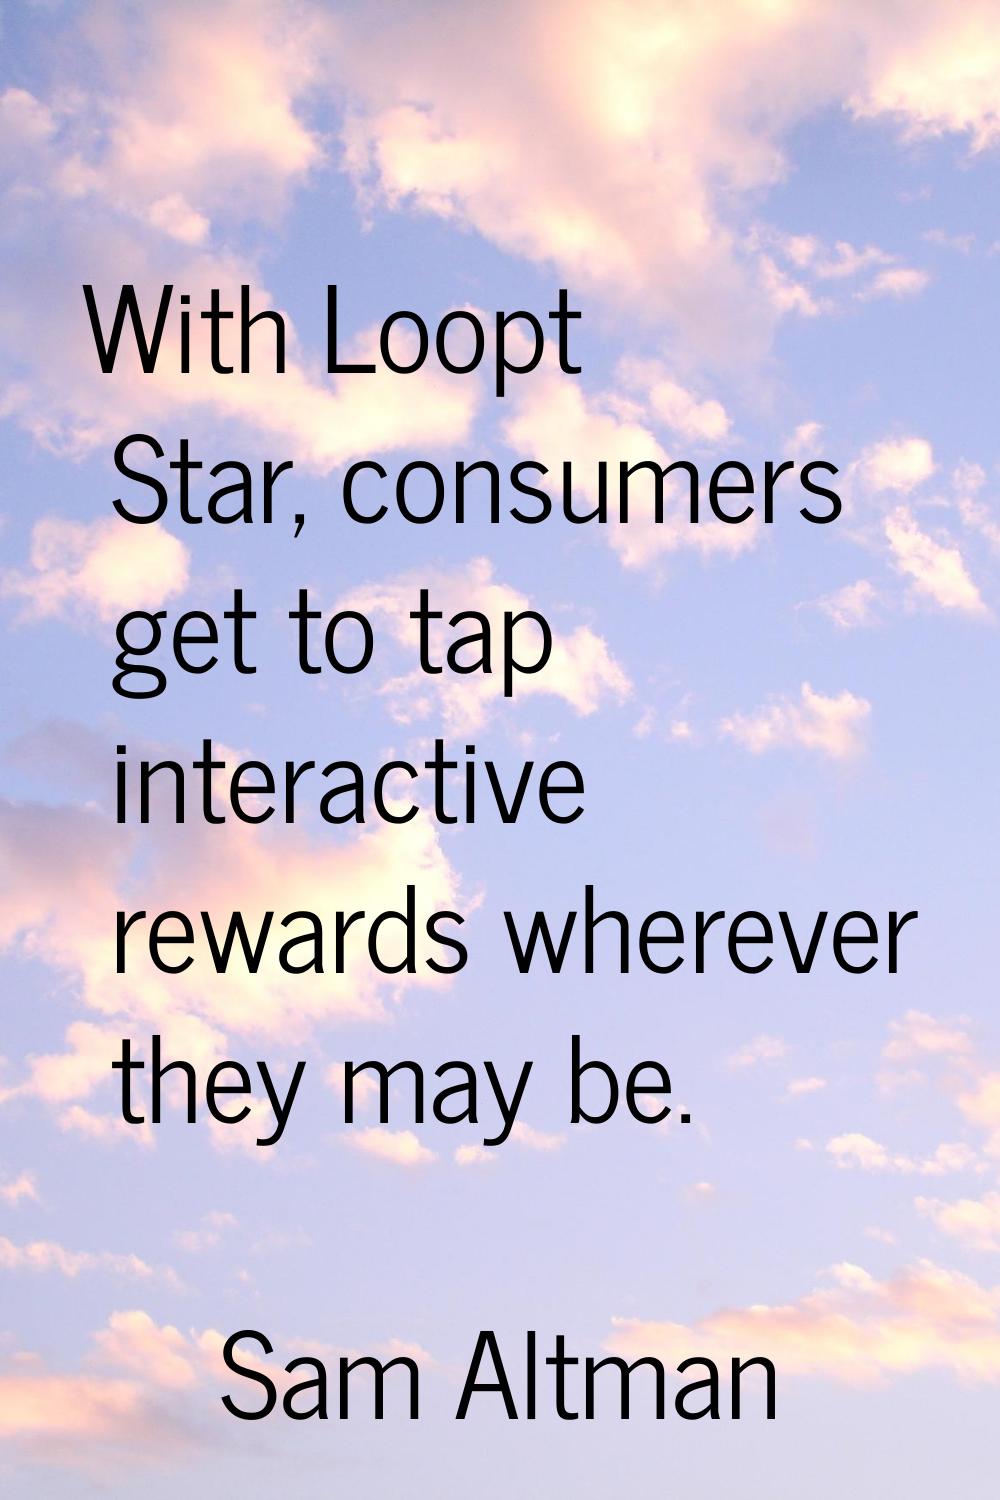 With Loopt Star, consumers get to tap interactive rewards wherever they may be.